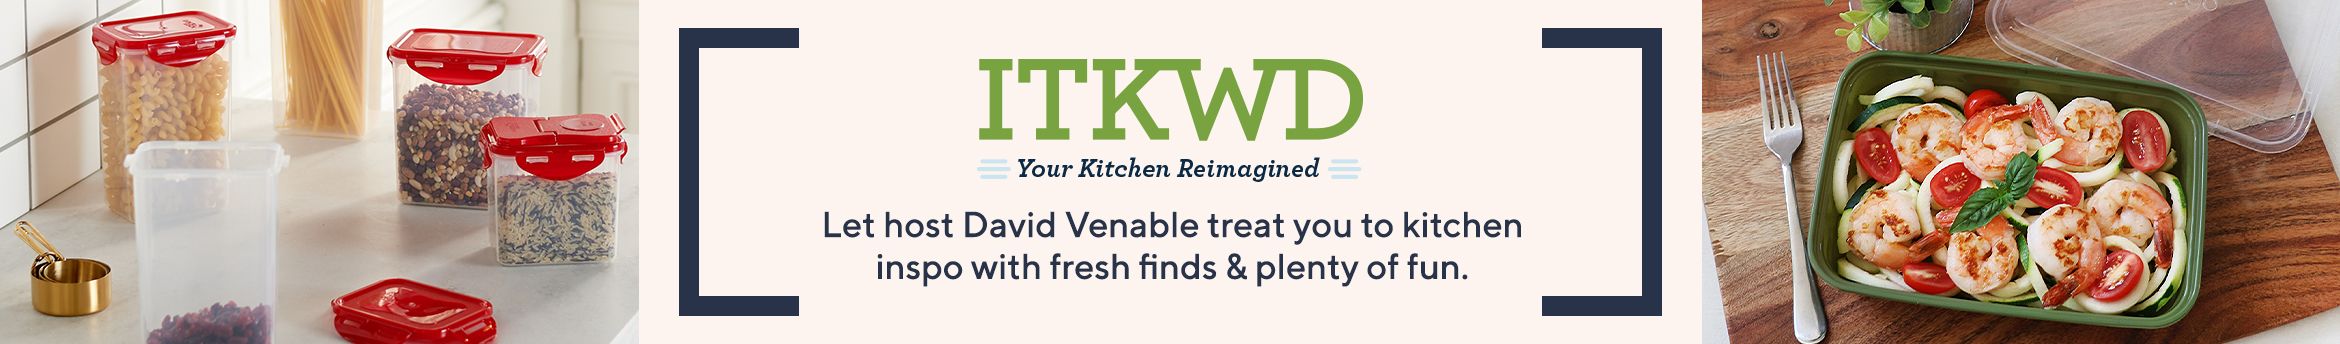 Let host David Venable treat you to kitchen inspo with fresh finds & plenty of fun. 